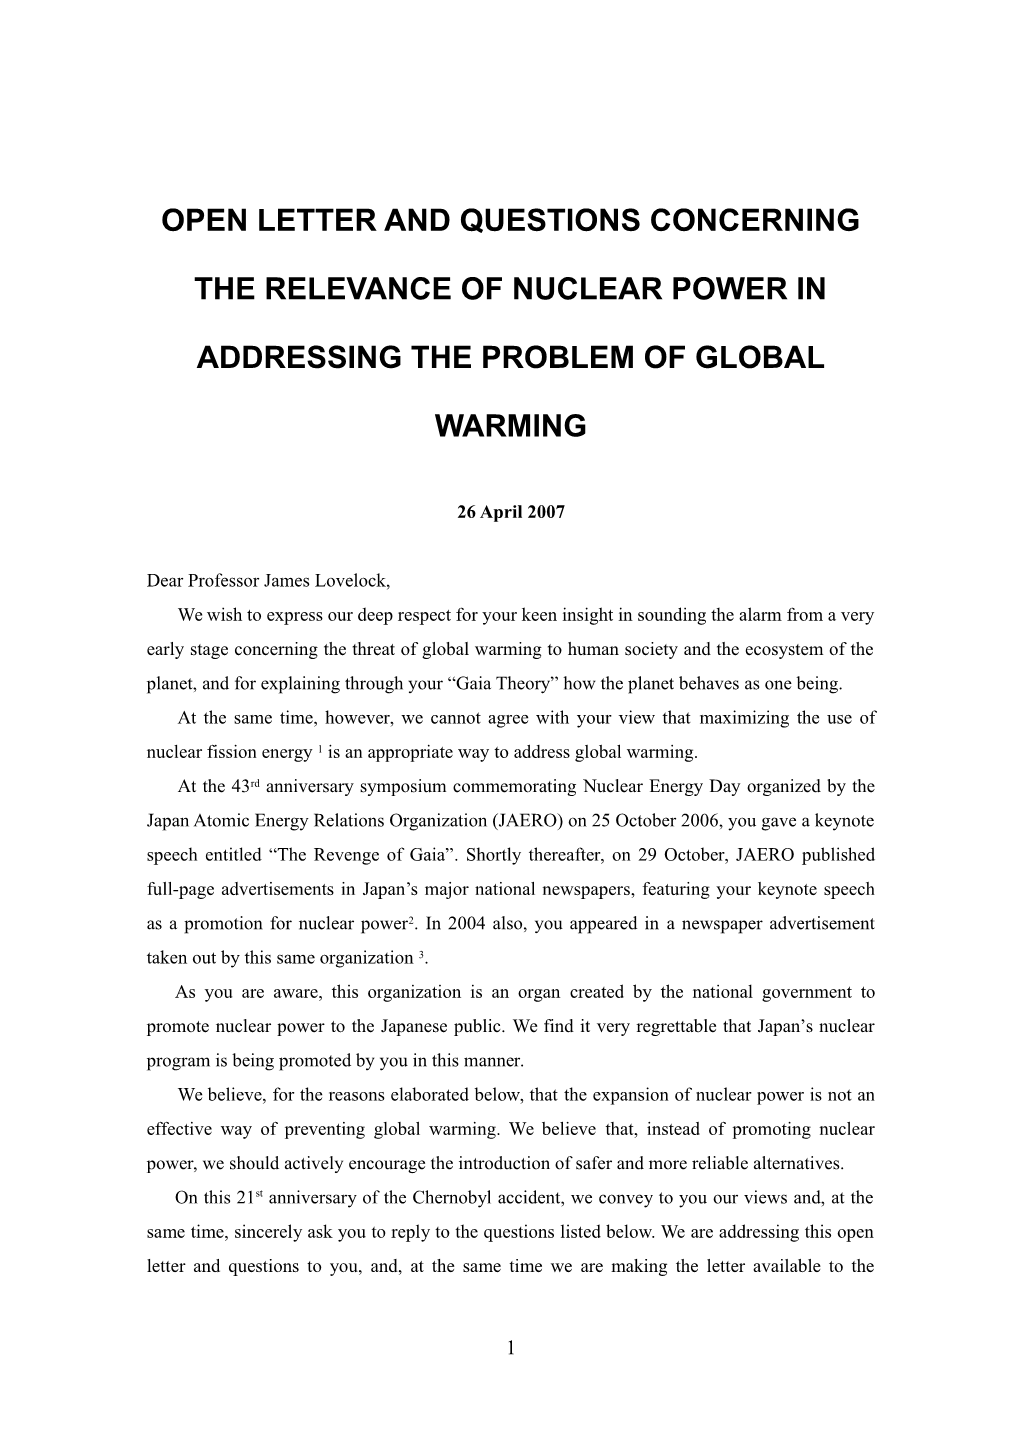 Open Letter and Questions Concerning the Relevance of Nuclear Power in Addressing The